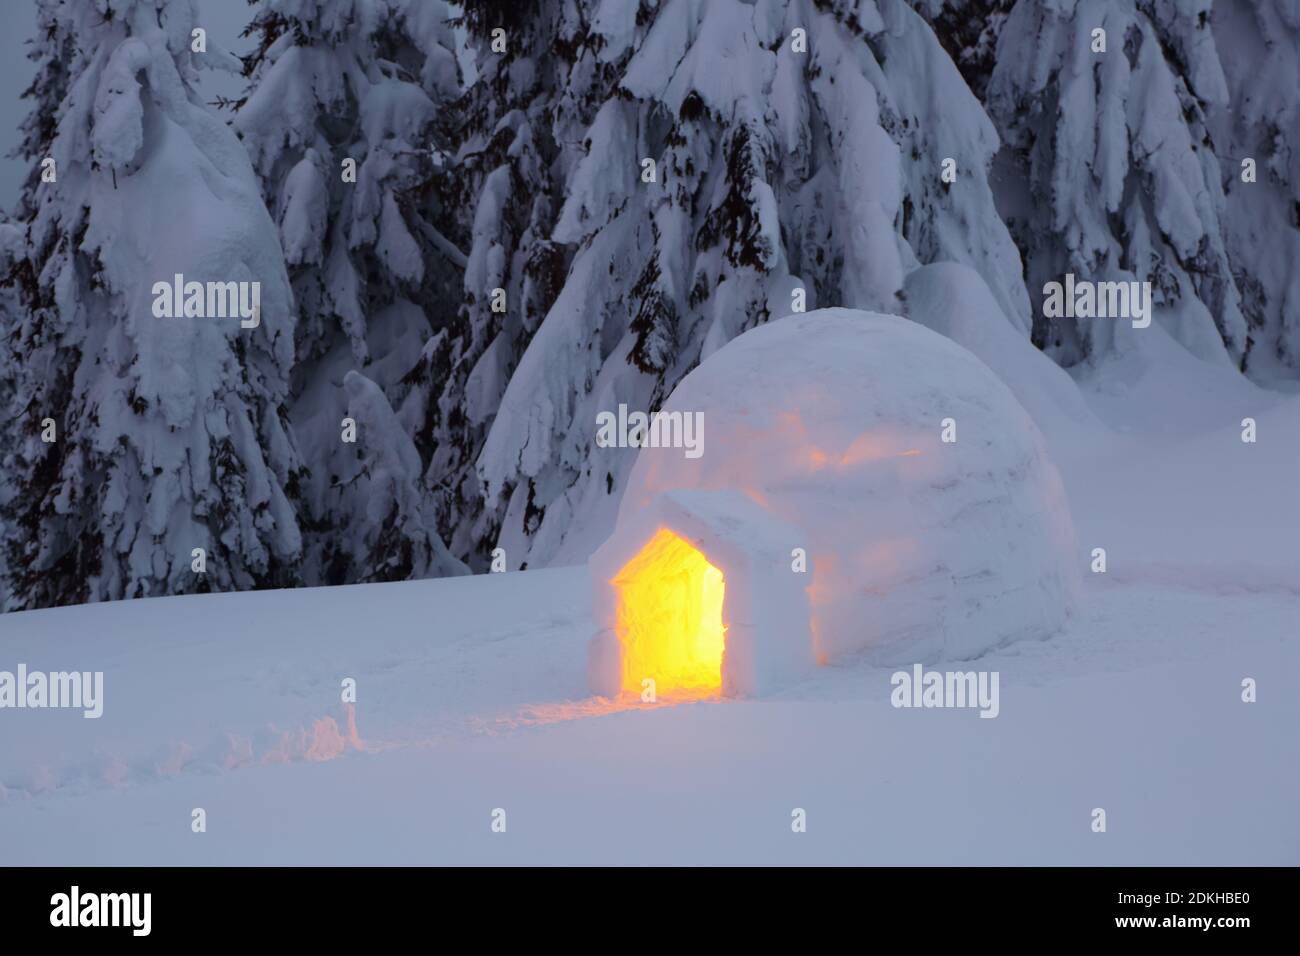 Igloo stands on the snowy lawn. Night winter mountain landscapes. House with light. Location place the Carpathian Mountains, Ukraine, Europe. Stock Photo